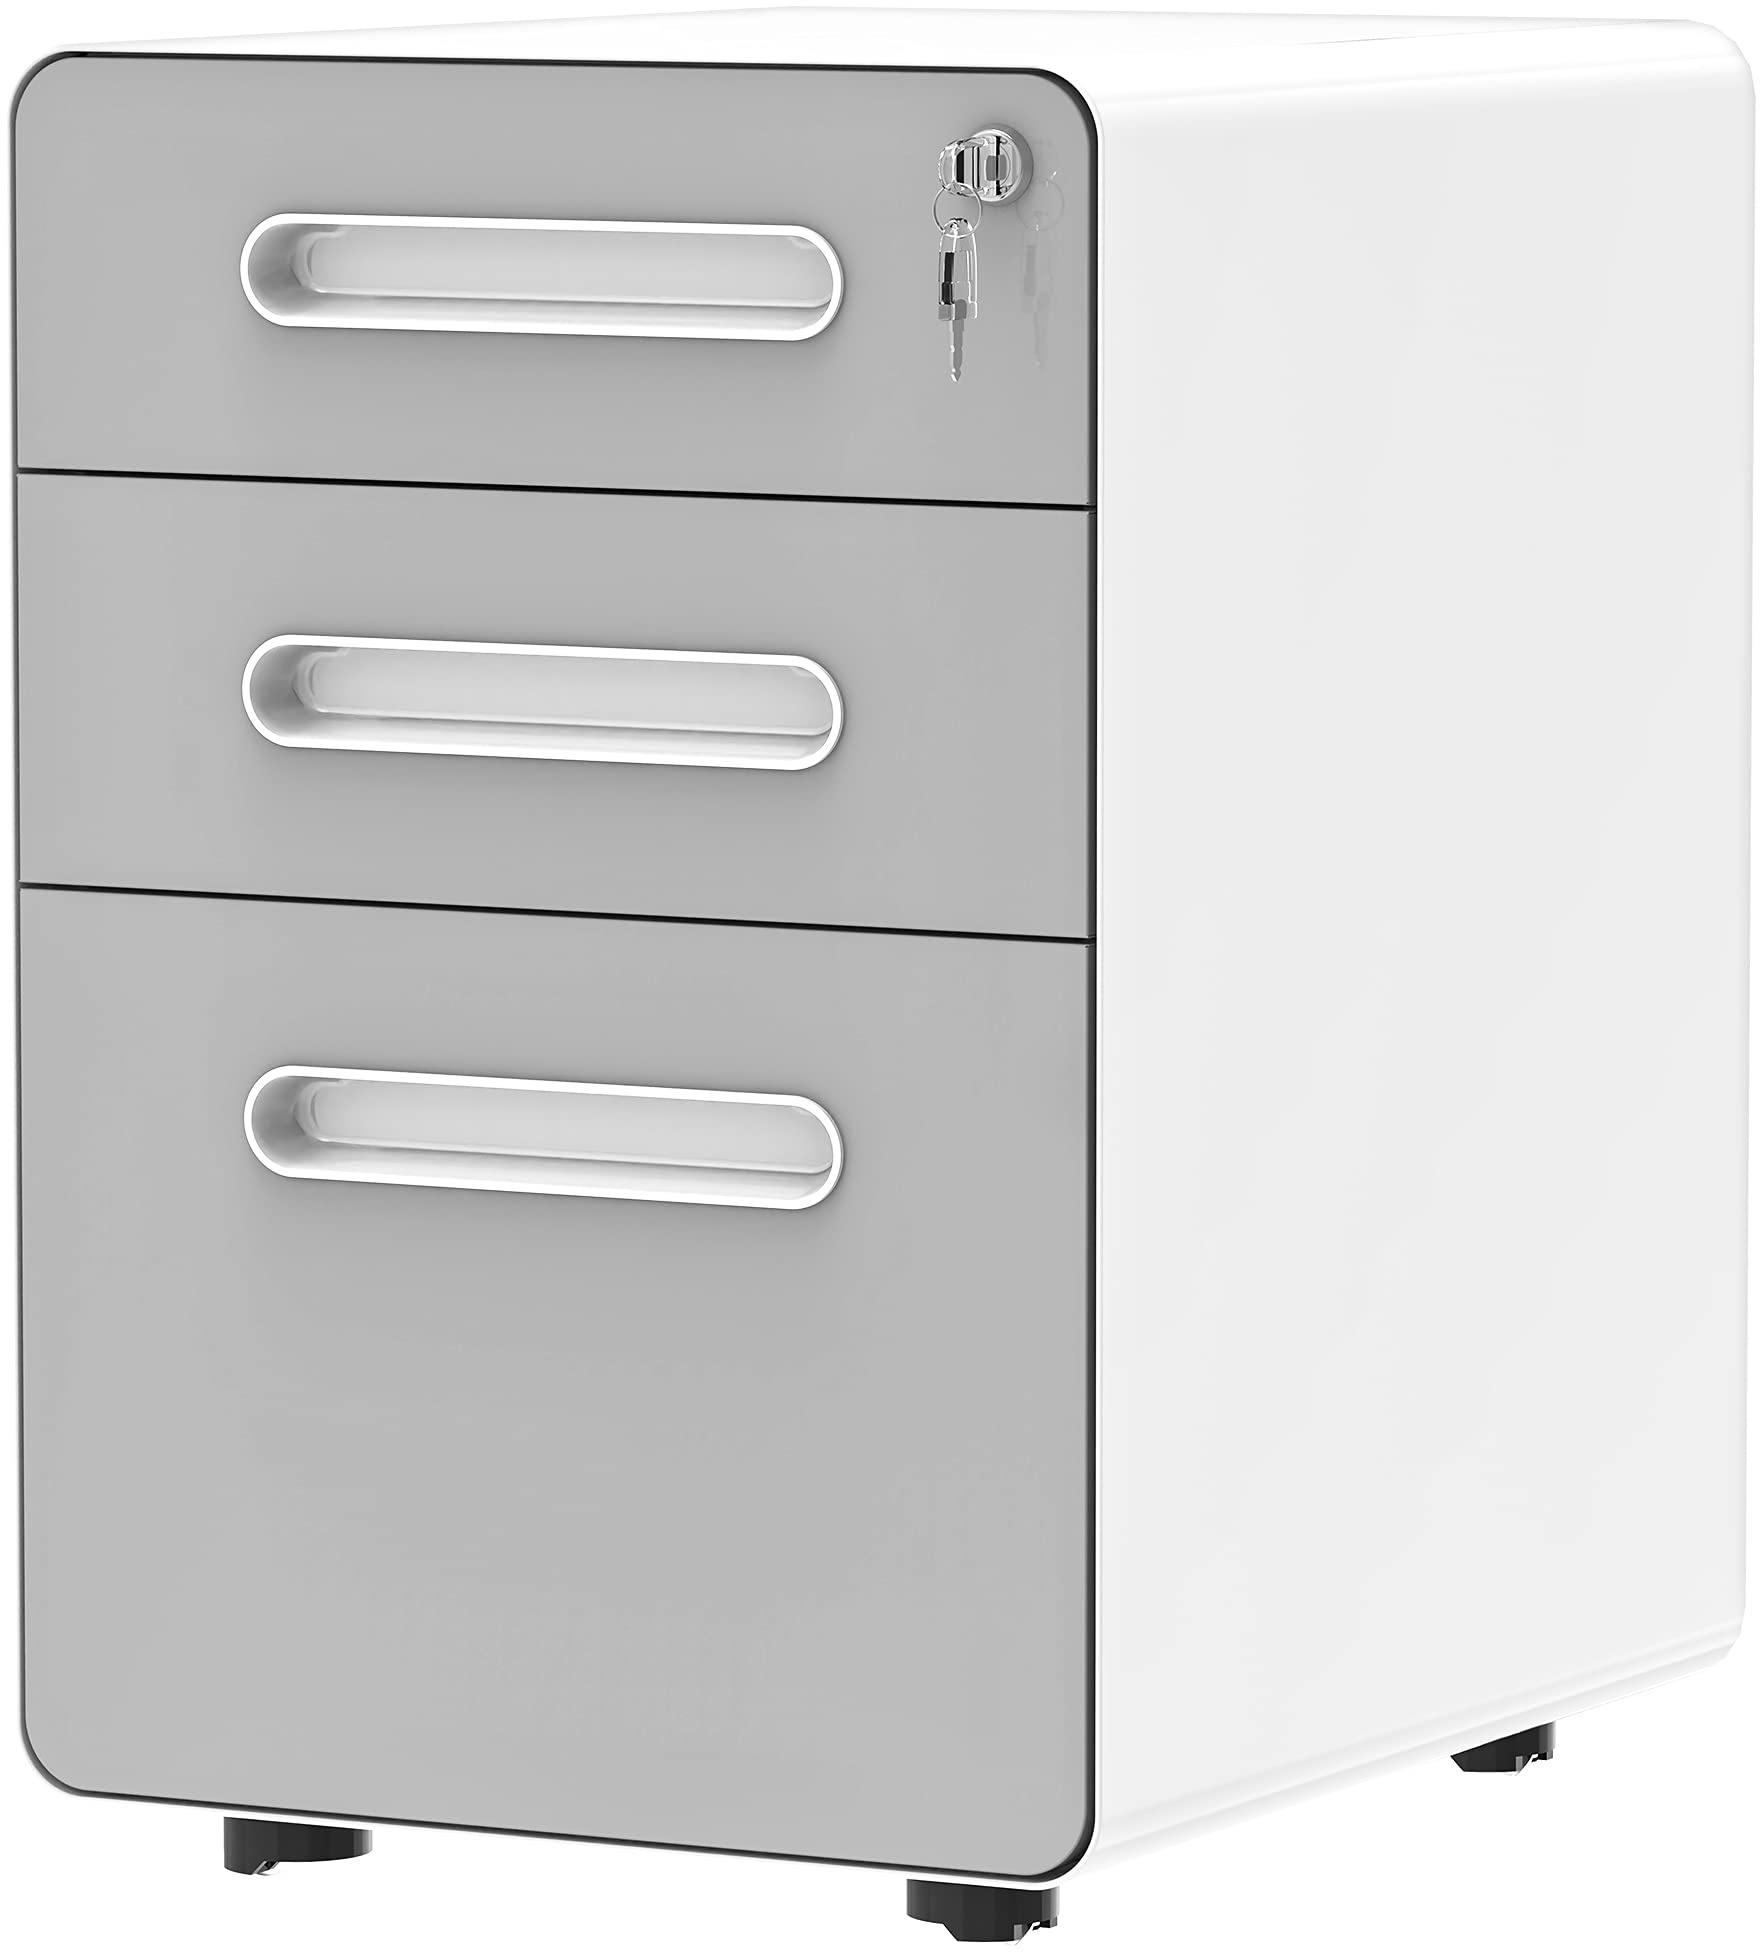 YITAHOME 3-Drawer Rolling File Cabinet, Metal Mobile File Cabinet with Lock, Filing Cabinet Under Desk fits Legal/Letter/A4 Size for Home/Office, Fully Assembled, Gray and White